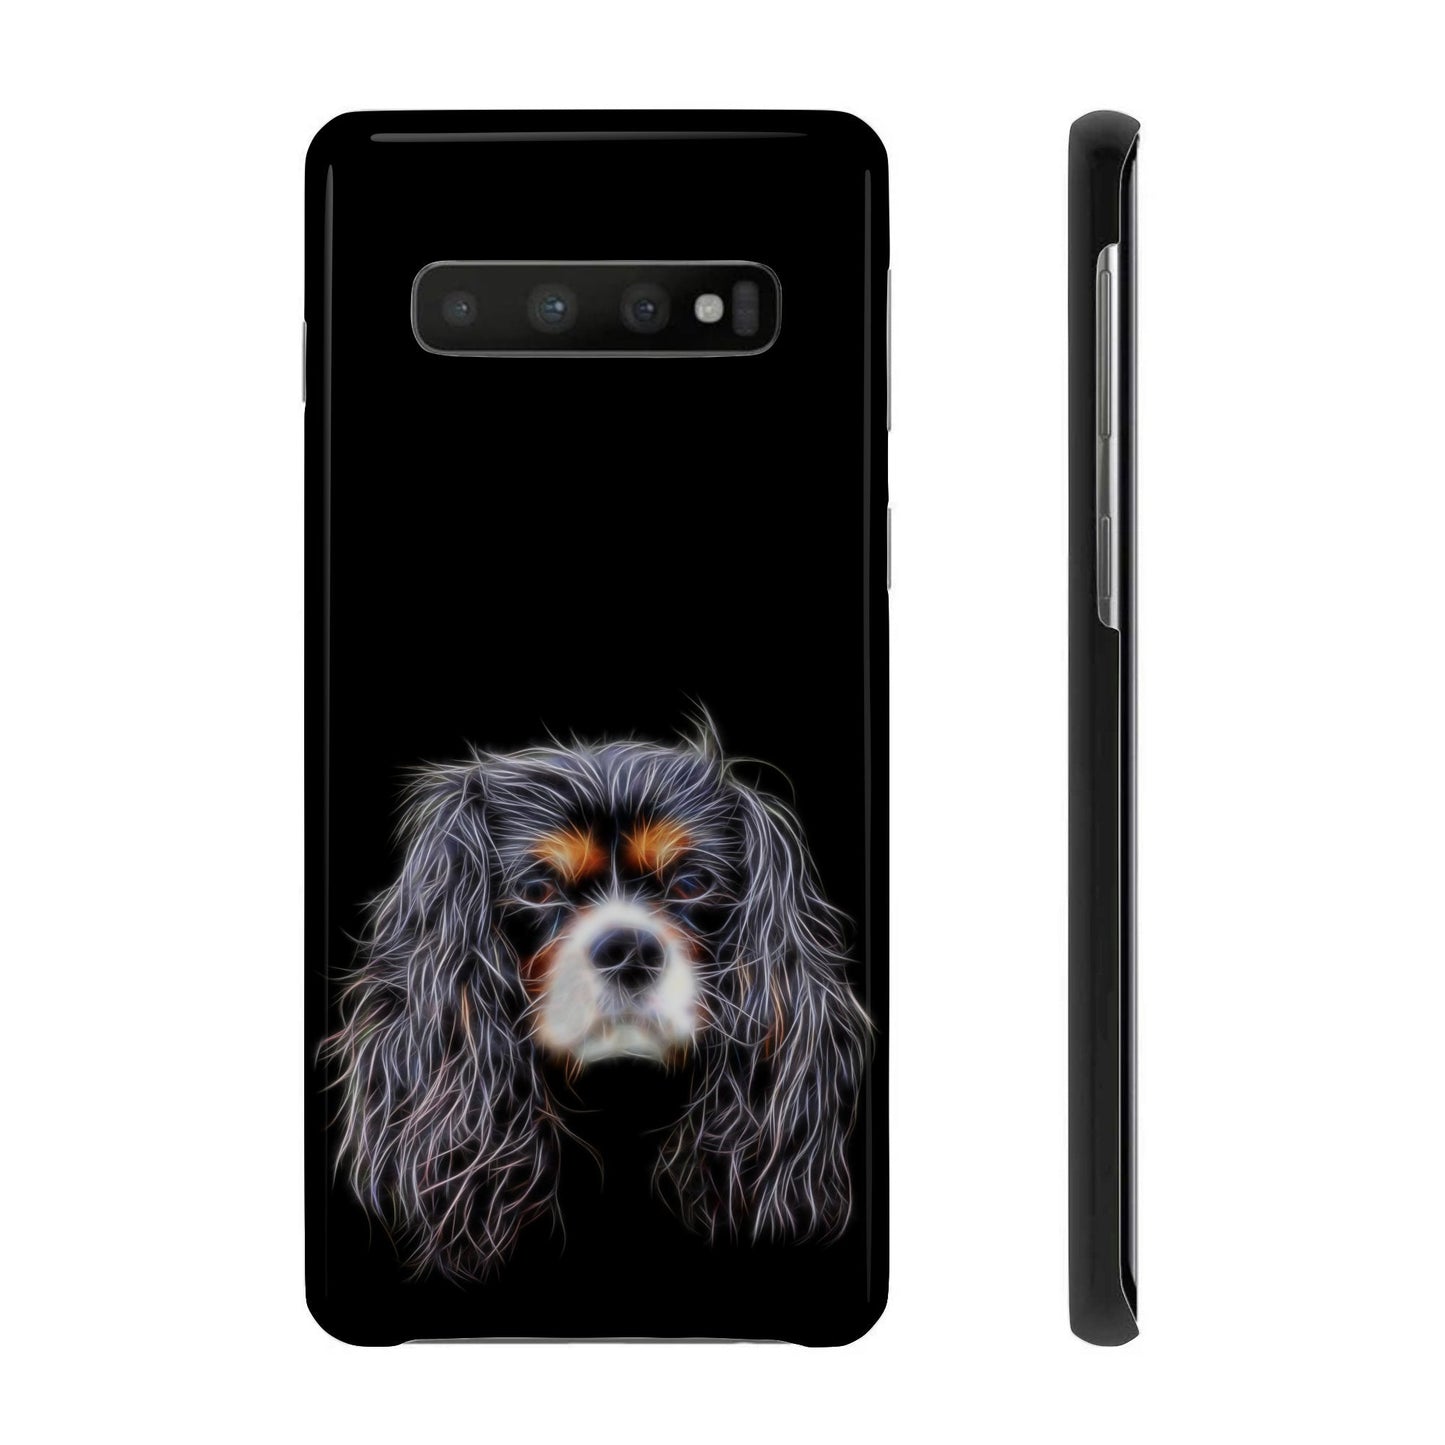 Tricolour King Charles Spaniel Phone Cases with Stunning Fractal Art Design. For Samsung or iPhone.